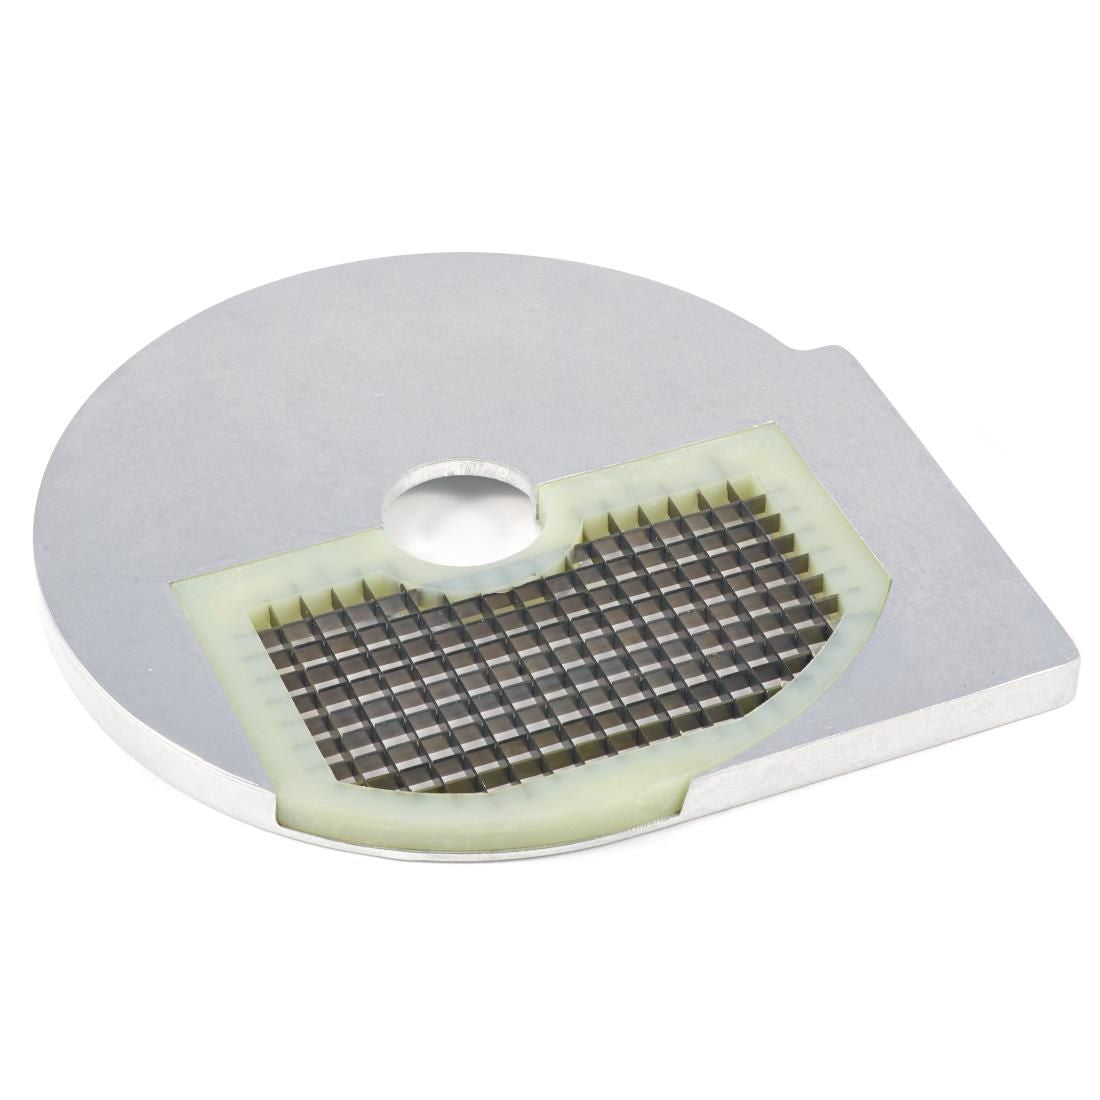 Buffalo 8x8mm Dicing Disc (not suitable for dicing onions or tomatoes.) JD Catering Equipment Solutions Ltd